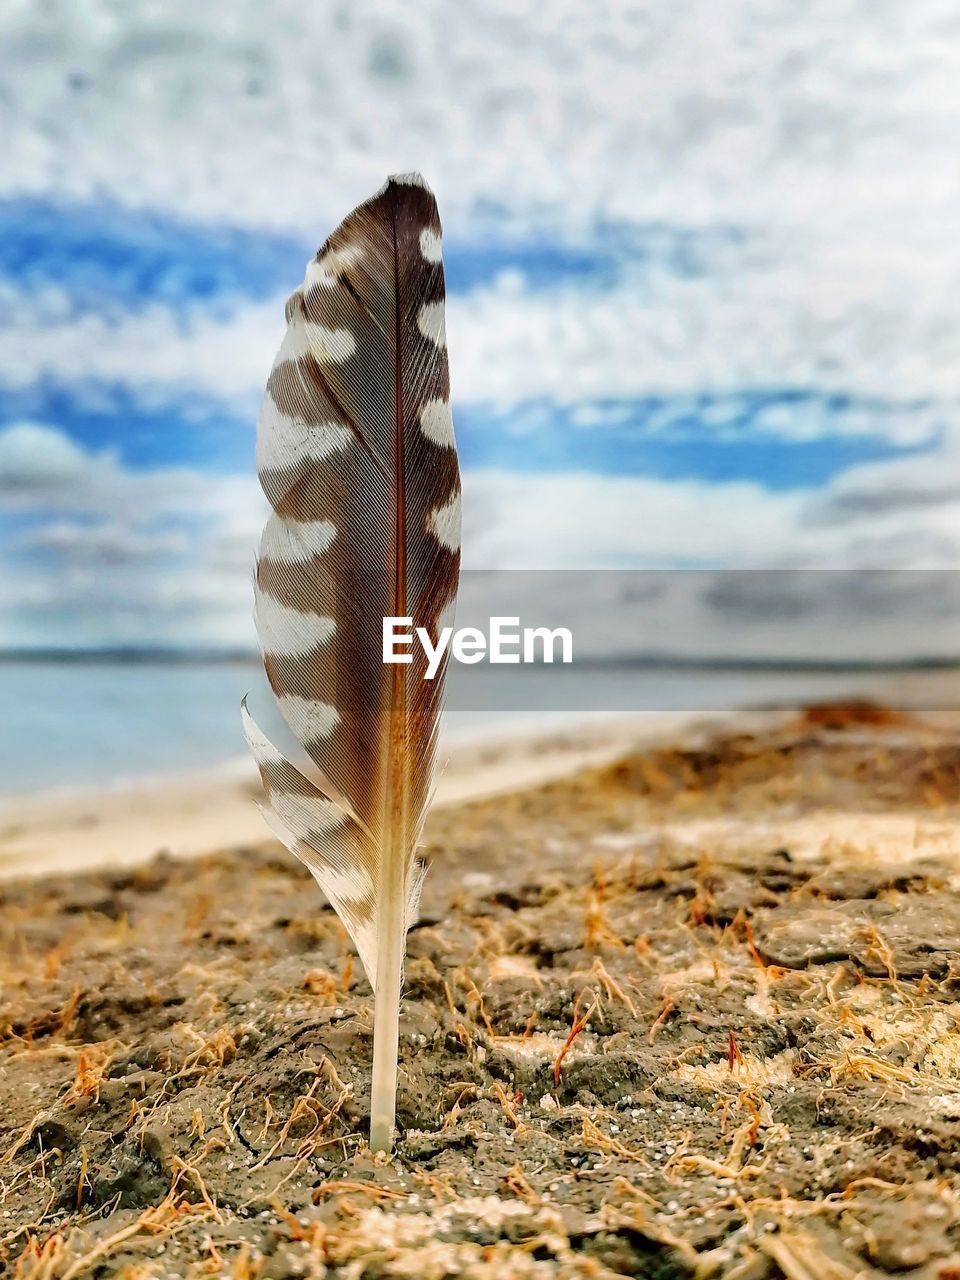 CLOSE-UP OF FEATHER ON BEACH AGAINST SEA